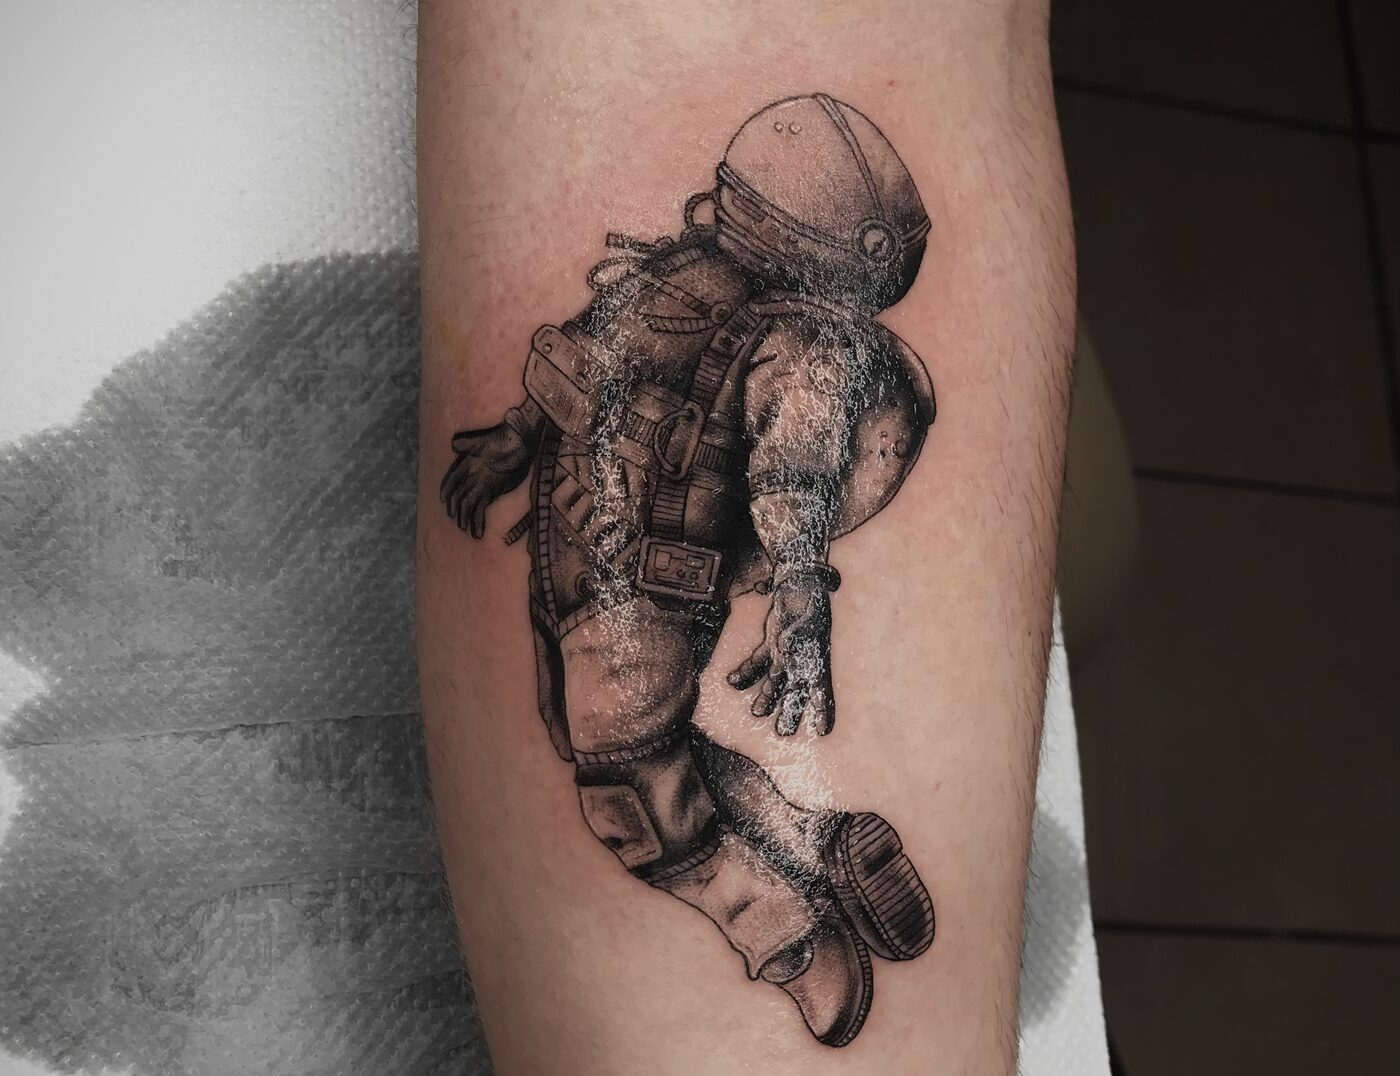 Astronaut Blackwork Tattoo By Rene Cristobal At Iron Palm Tattoos. We love how the astronaut is floating free on his arm. Call 404-973-7828 or stop by for a free consultation. Open til 2AM. Walk-ins are welcome.